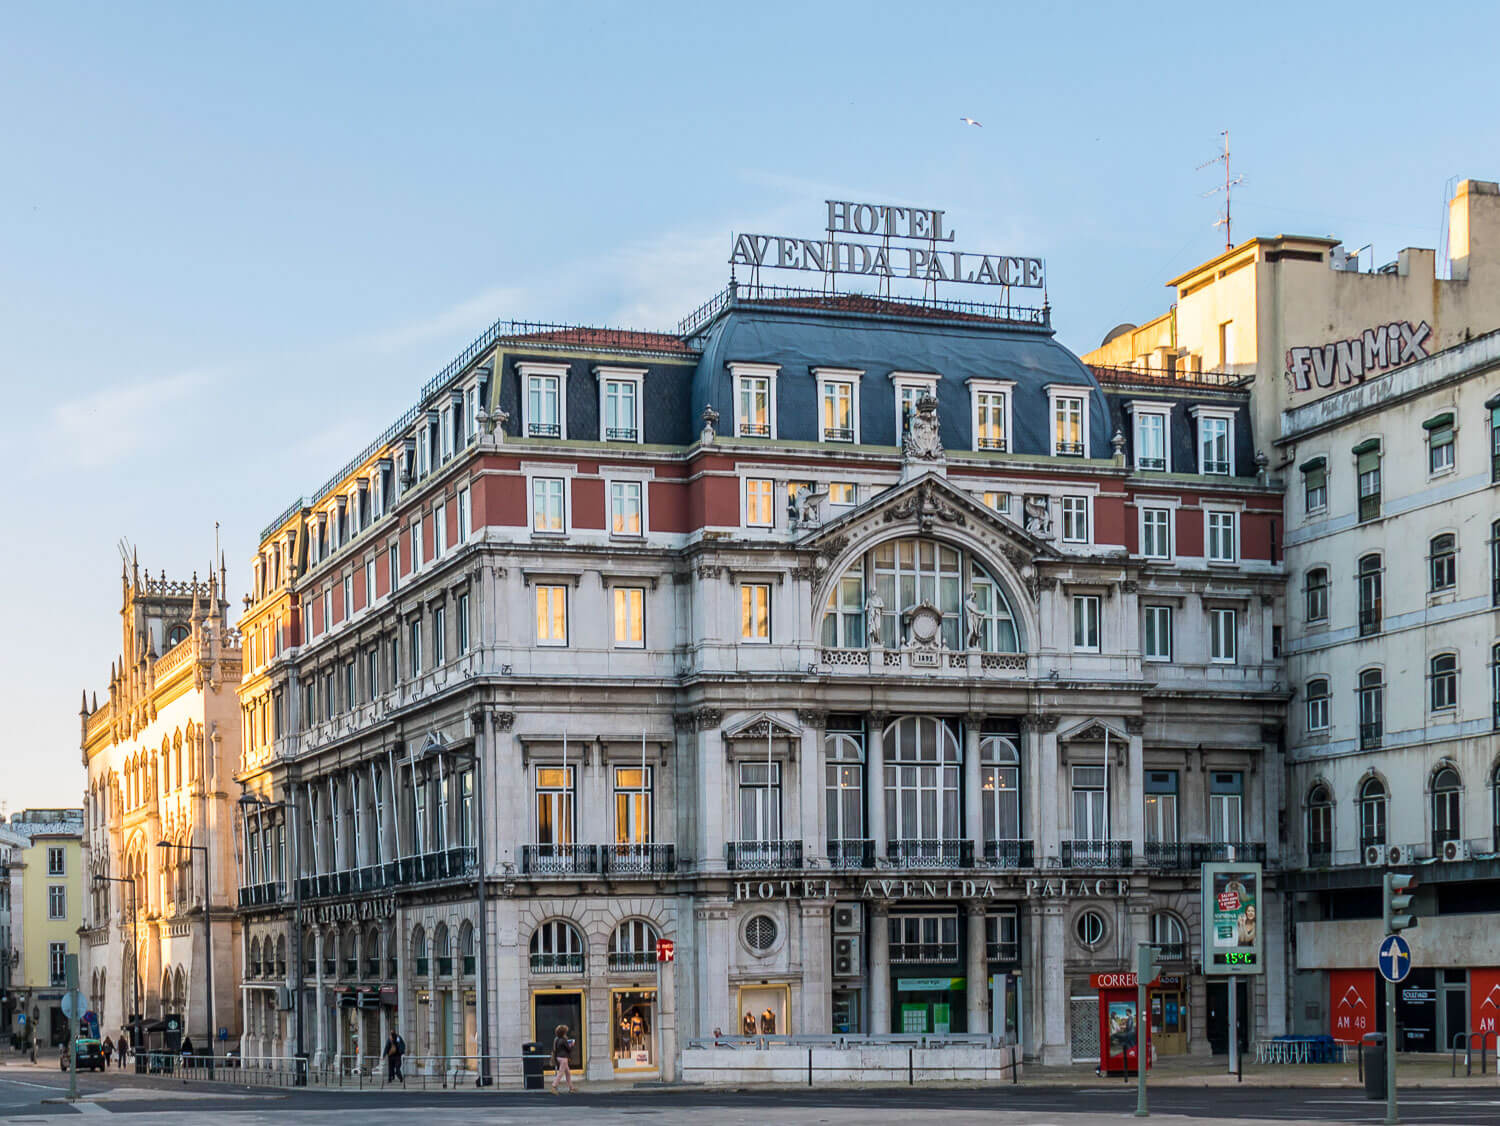 Hotel Avenida Palace, one of the best luxury hotels in Lisbon